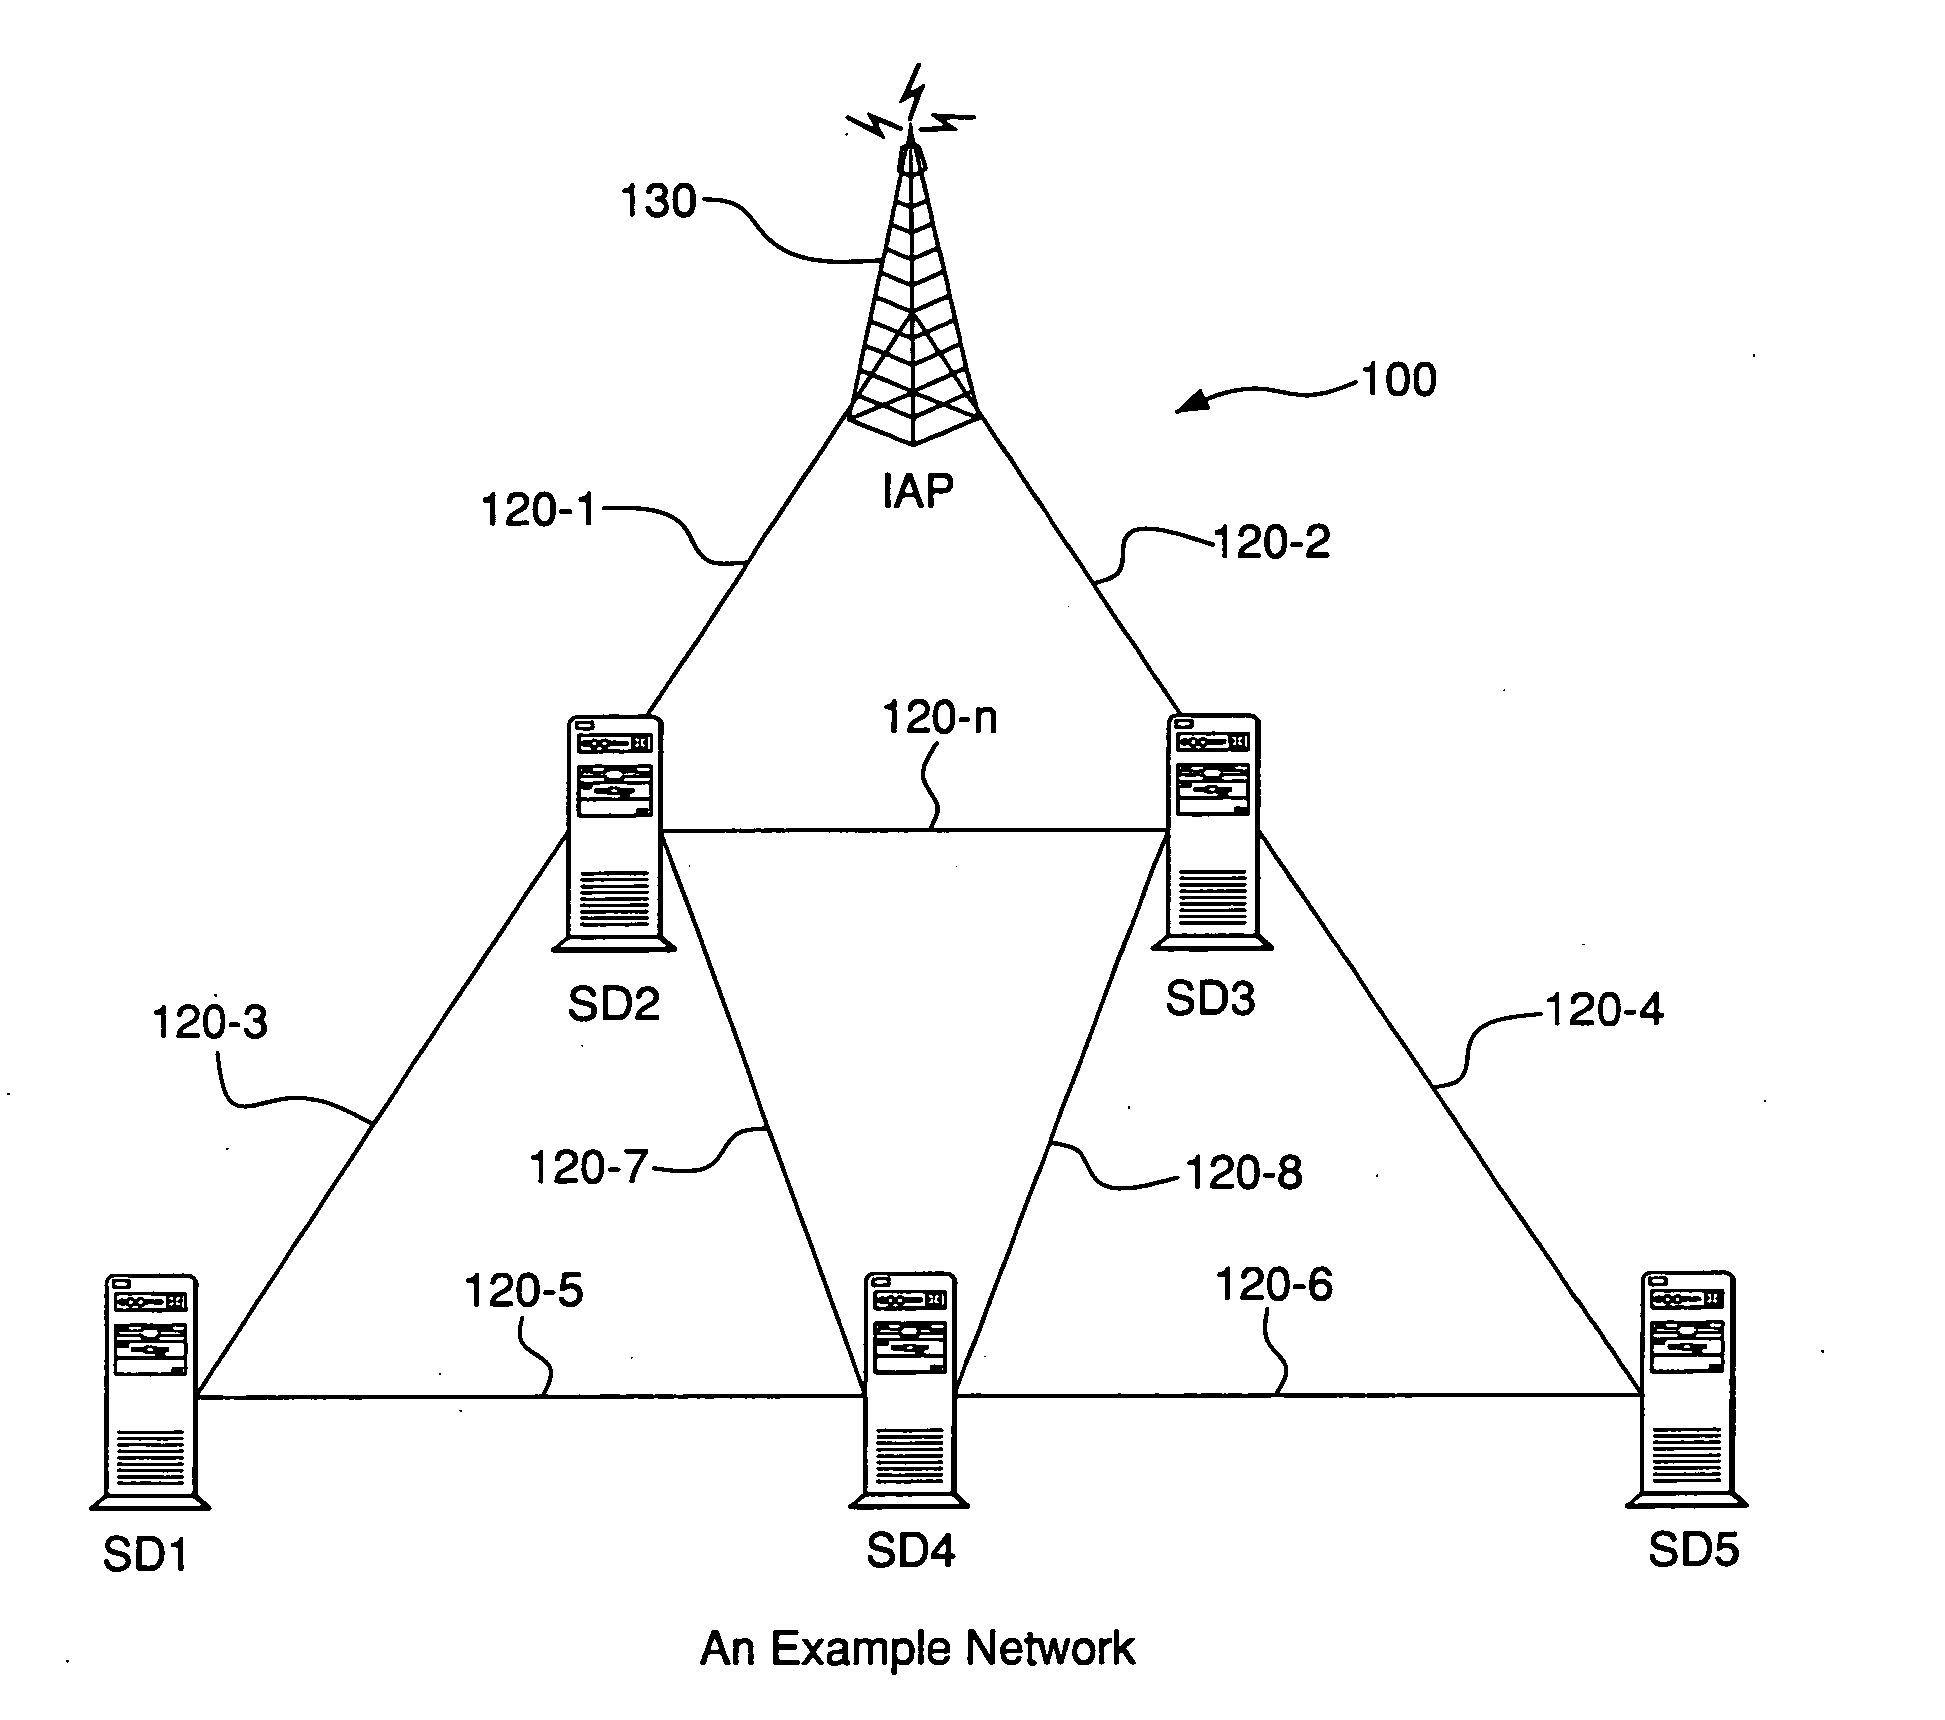 System and method to improve the overall performance of a wireless communication network